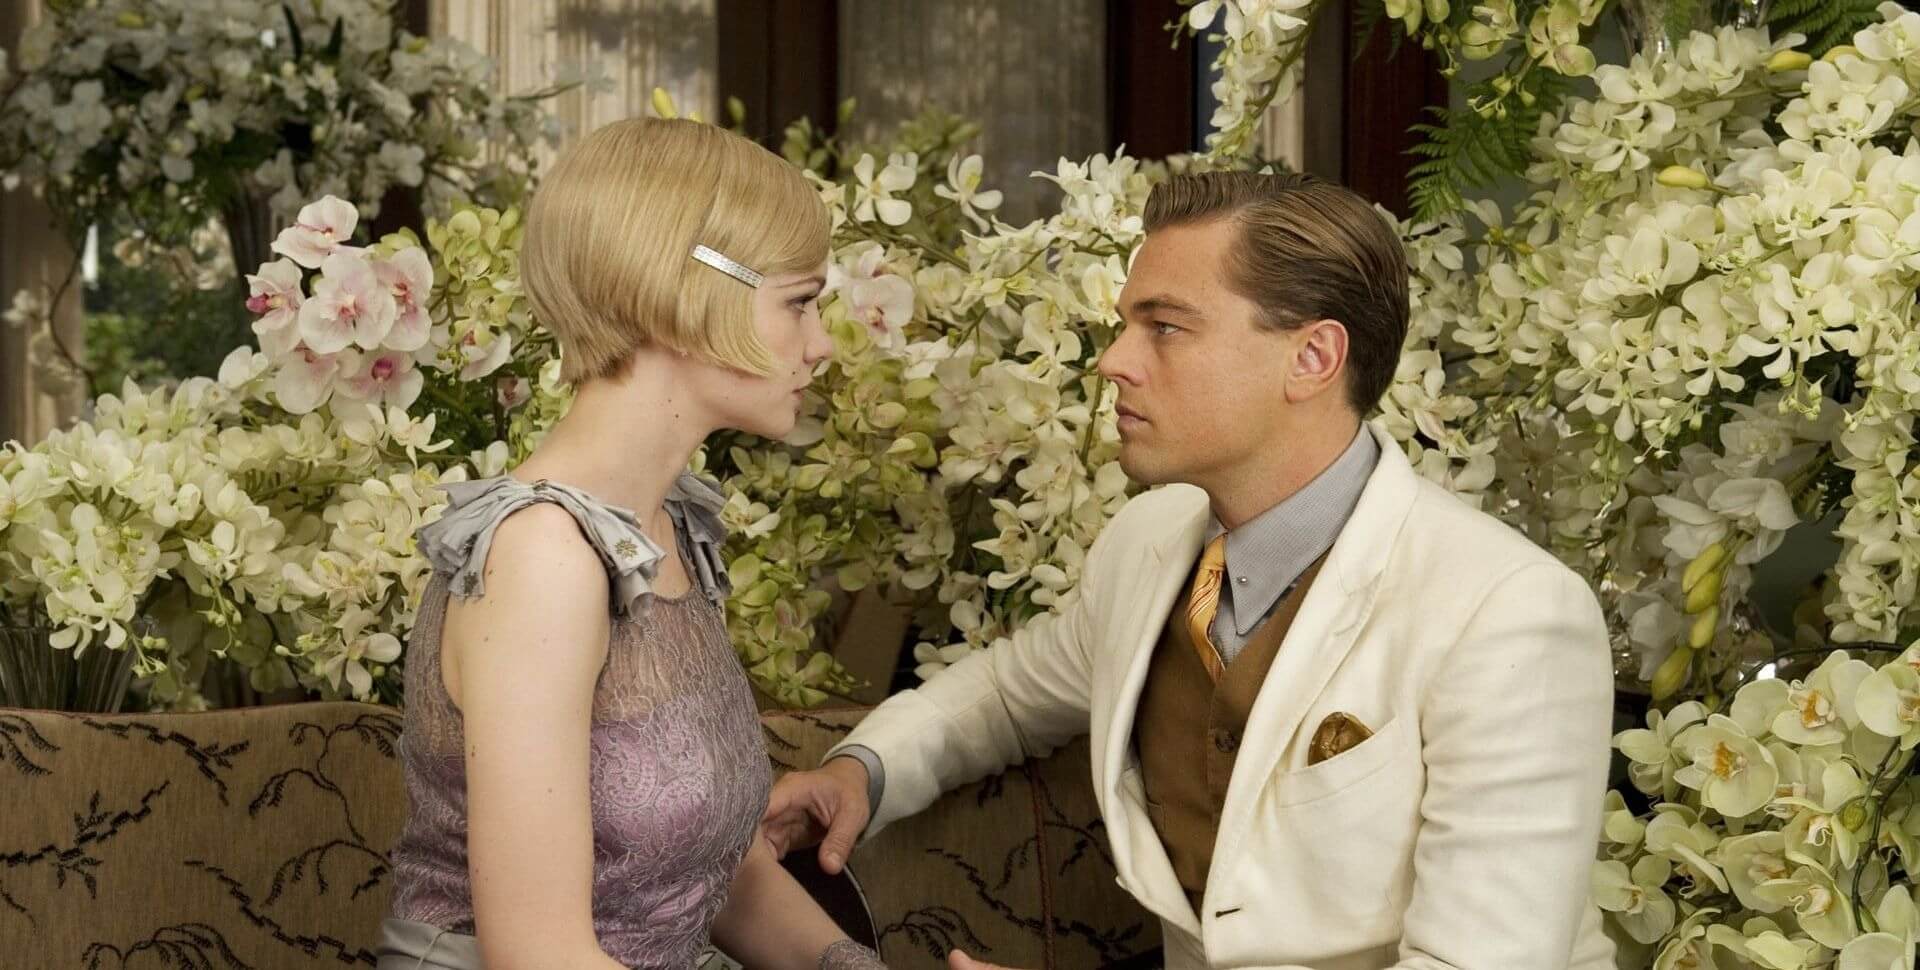 the great gatsby movie review 2013 essay